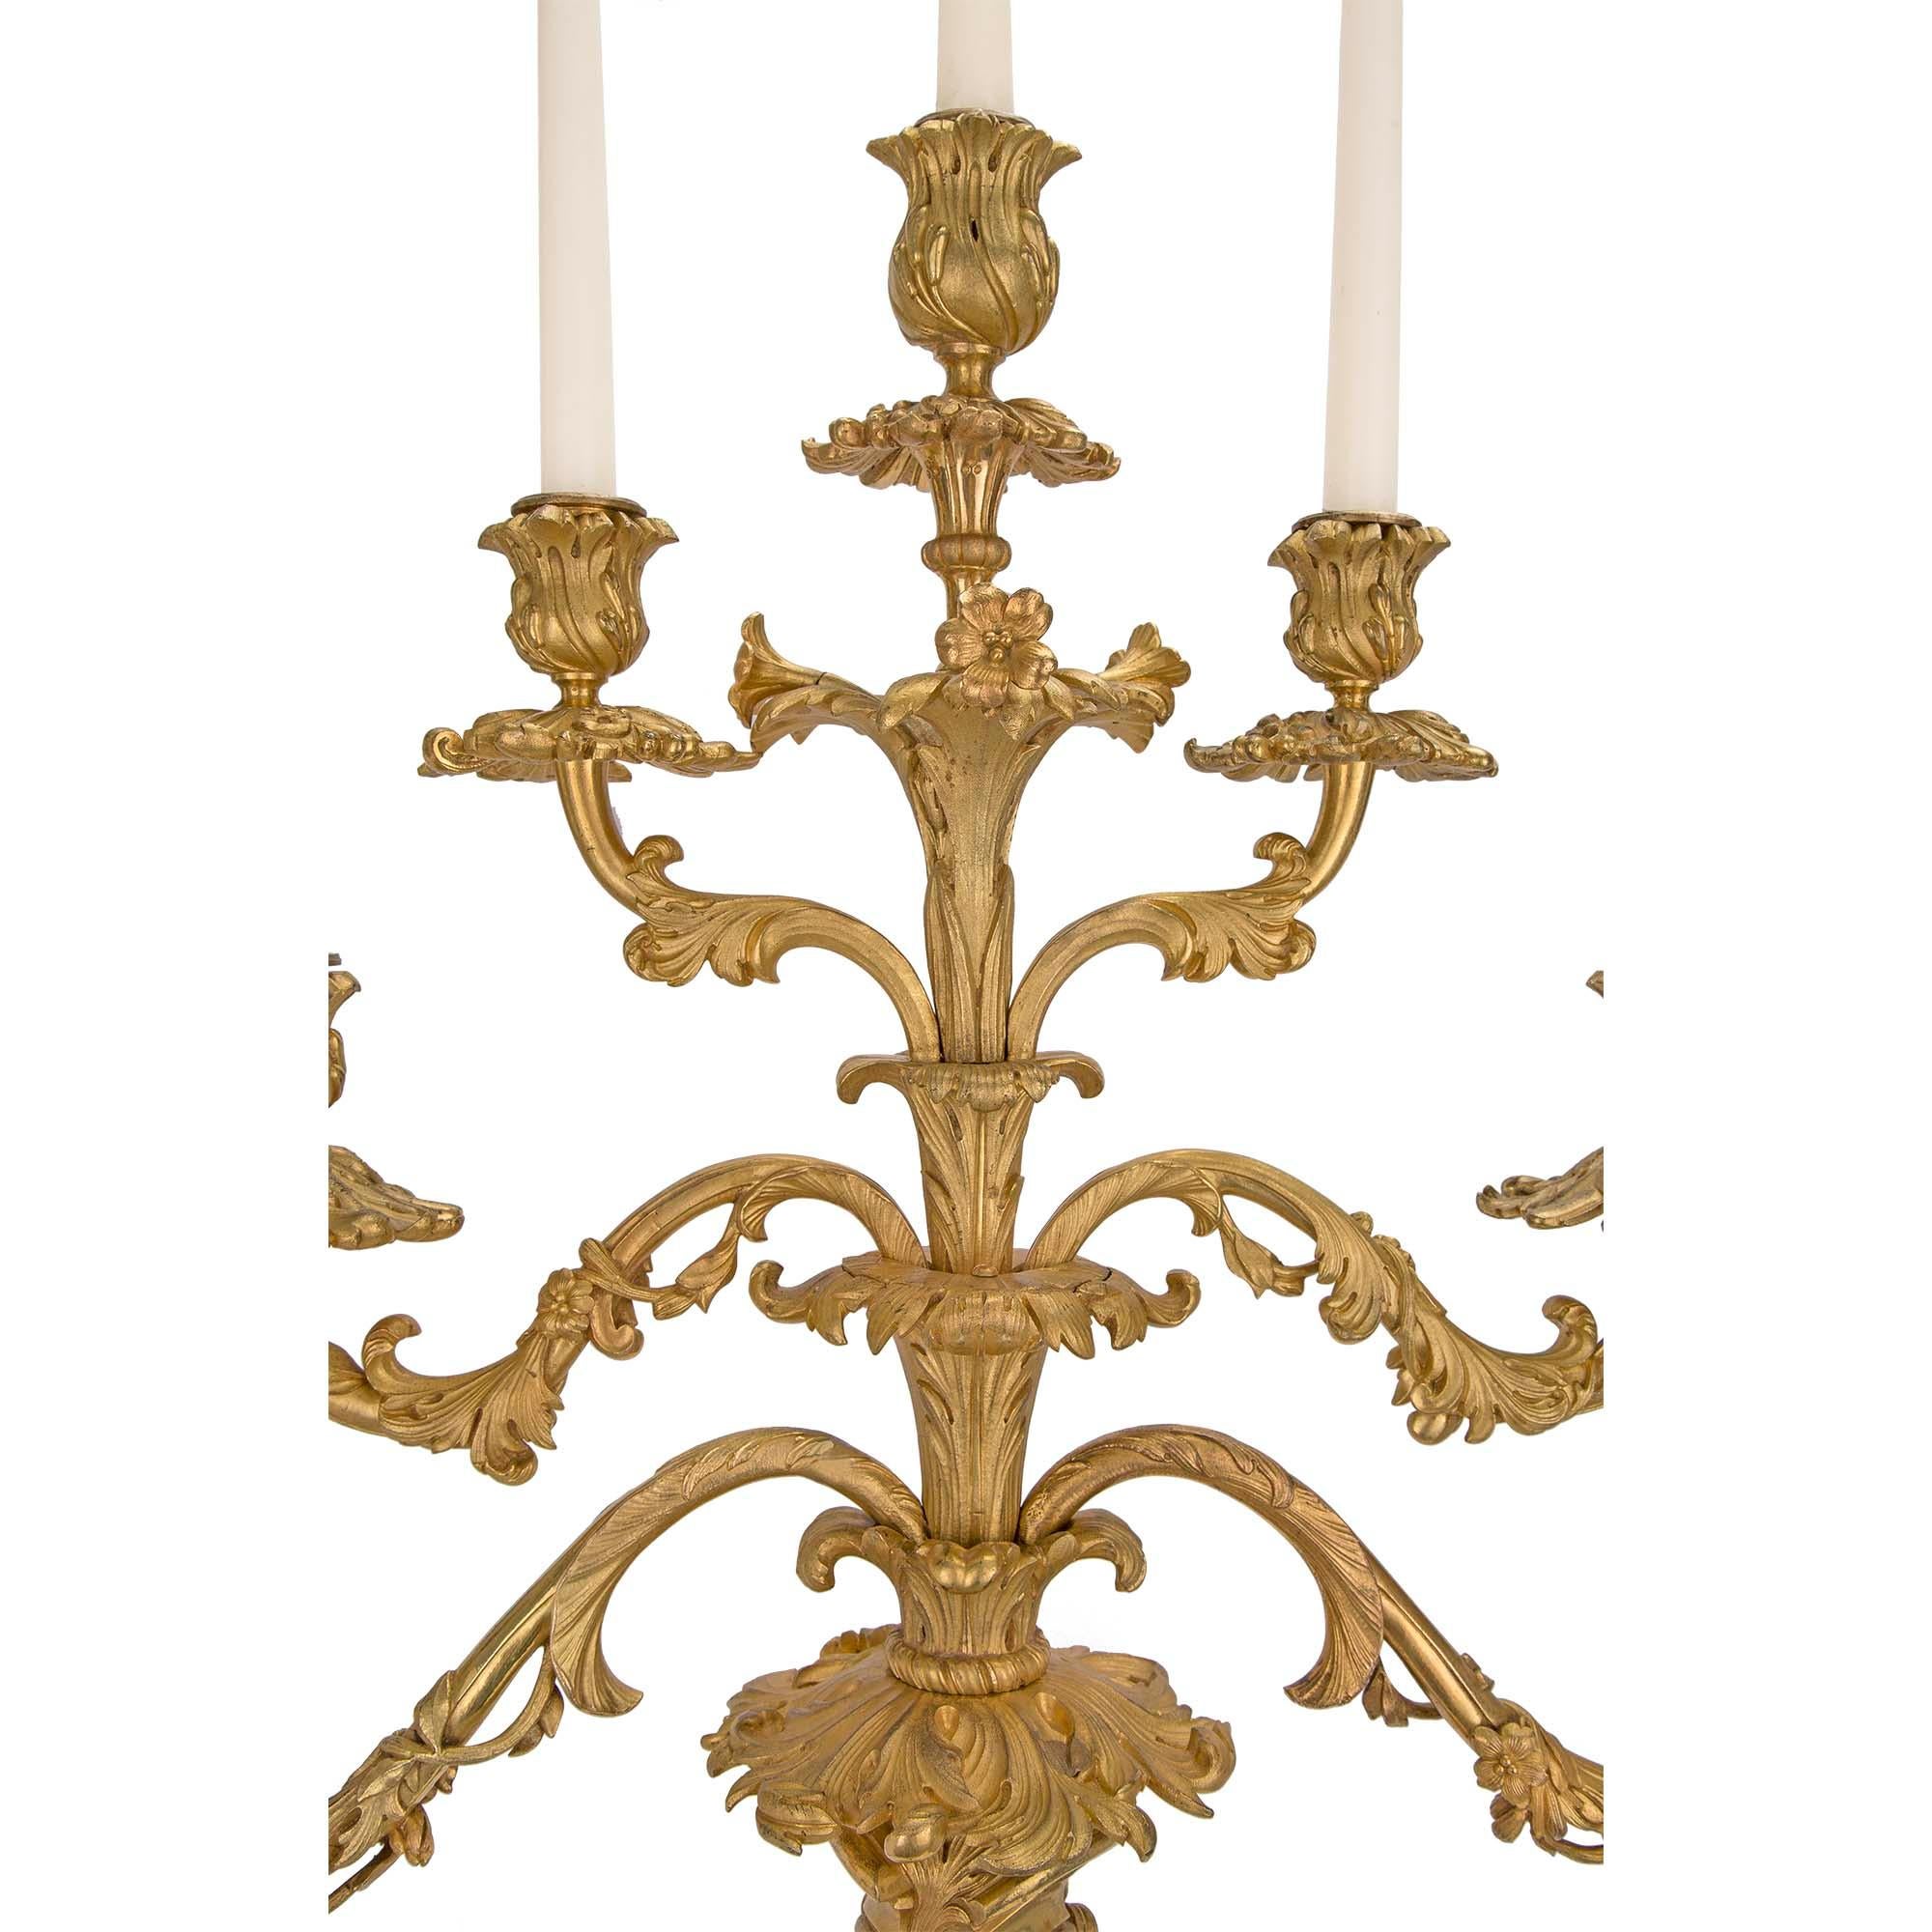 Pair of French Early 18th Century Régence Period Ormolu Candelabras In Good Condition For Sale In West Palm Beach, FL